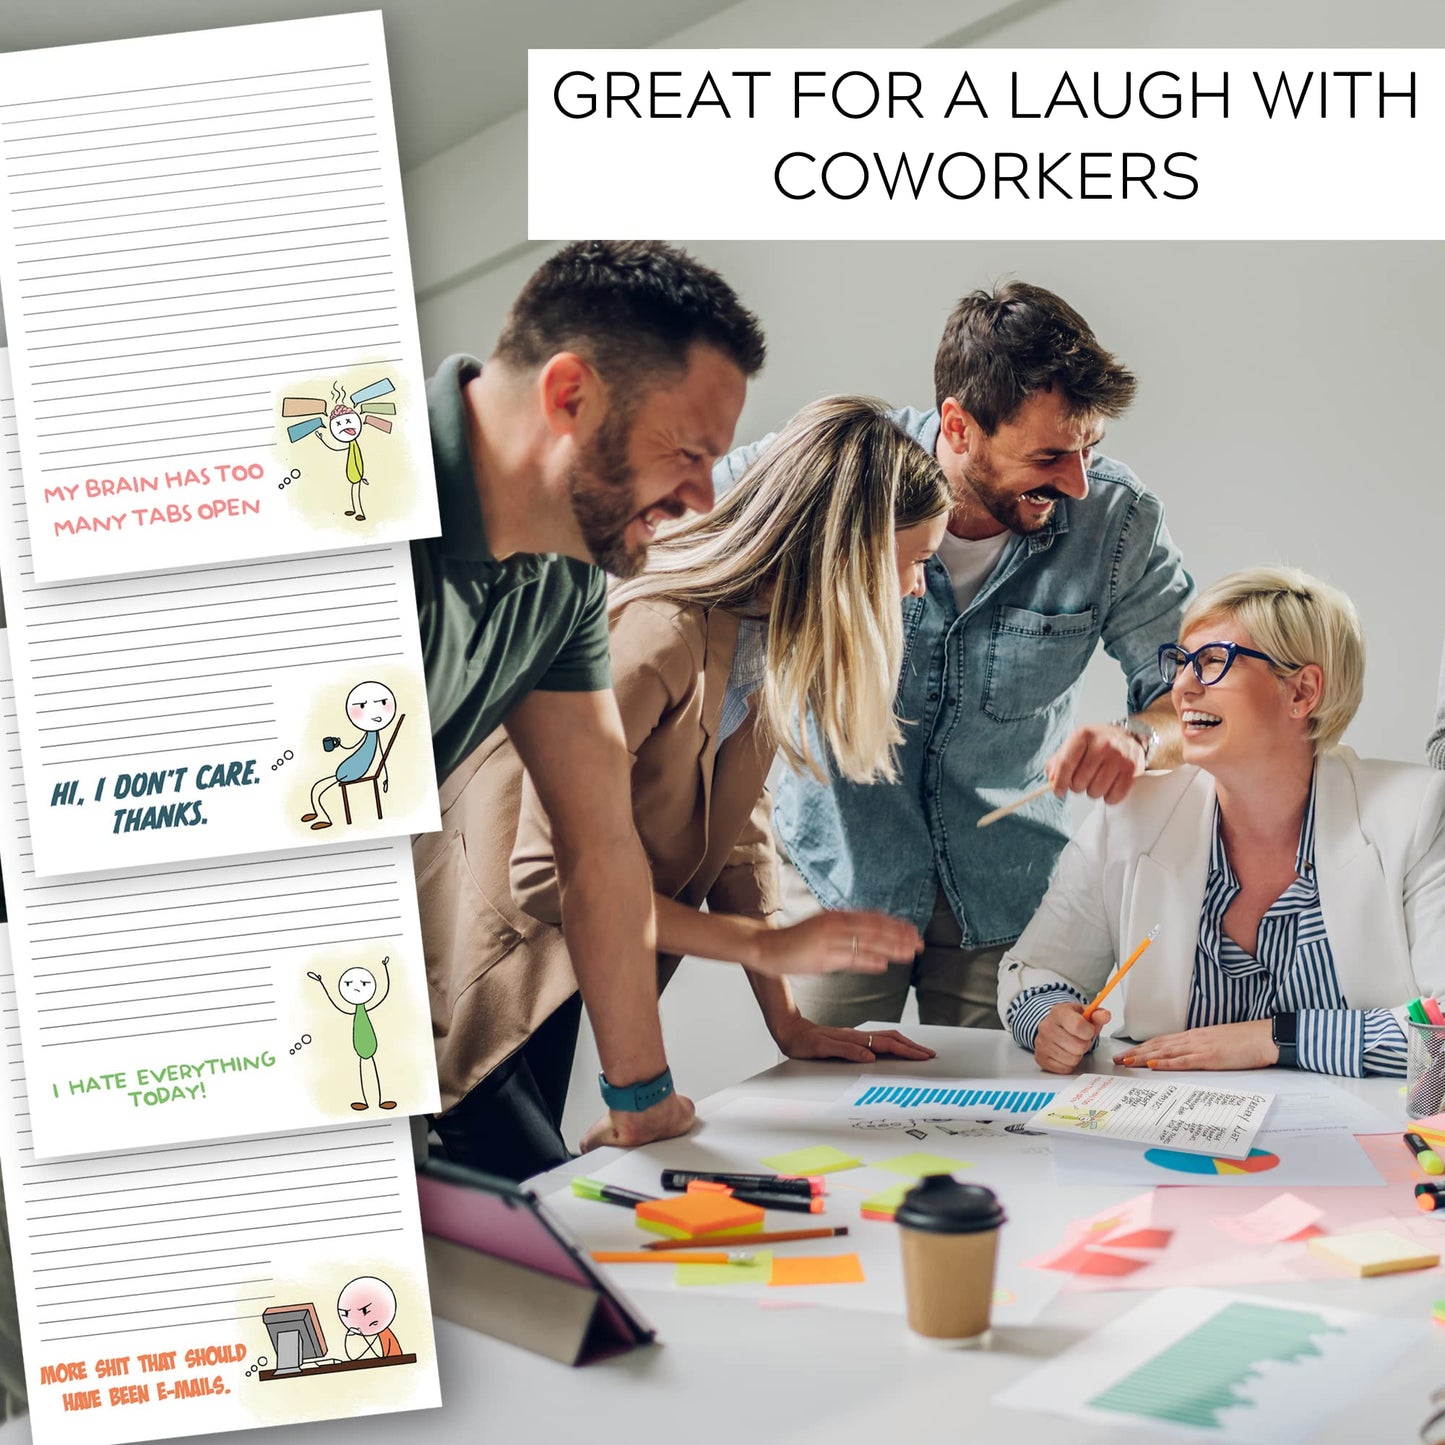 ZICOTO Super Funny Notepads That Will Make You Laugh - A Hilarious Christmas Gift for Your Women Coworkers - Unique Office Supplies Memo Pads Add a Little Humor into The Work Day at Office